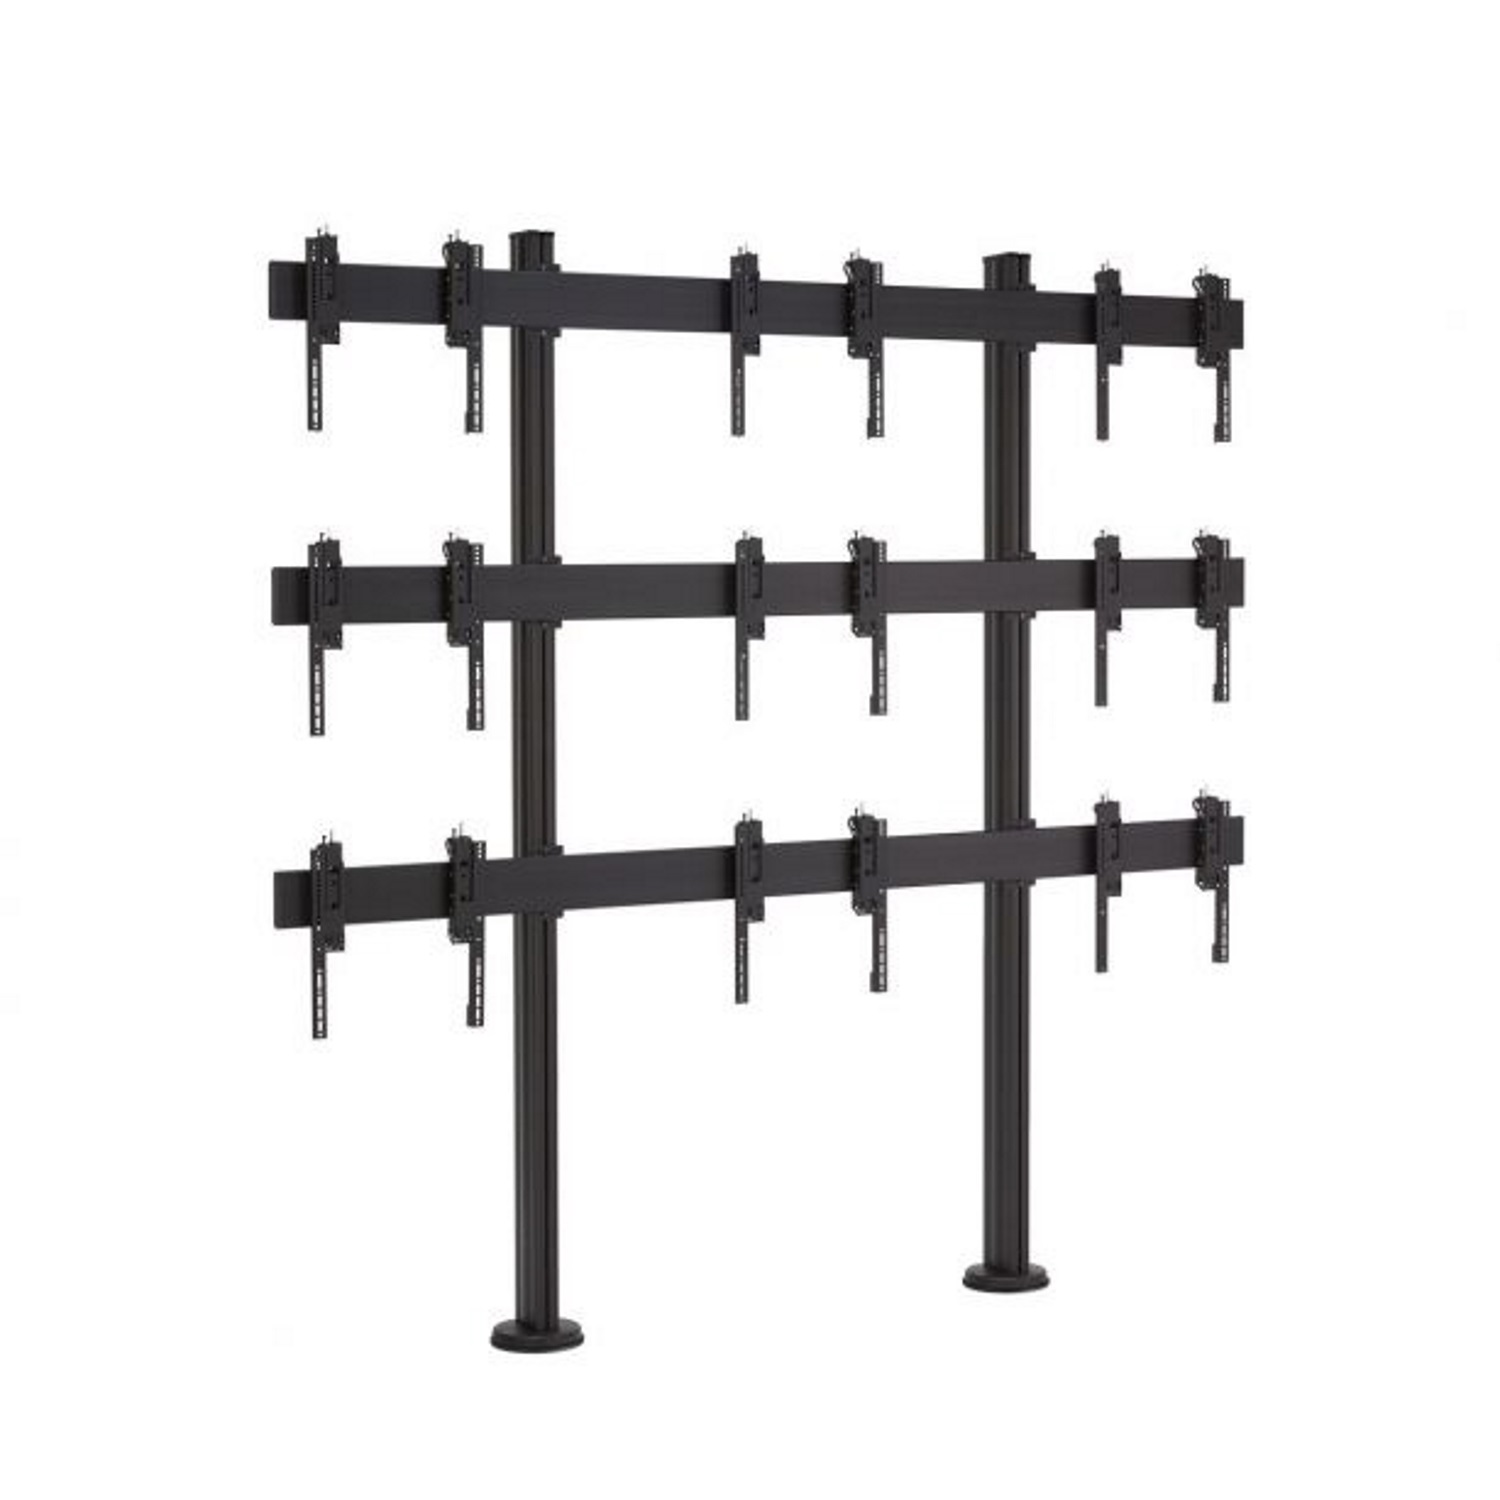 FMVW3347 Video Wall Floor Stand,